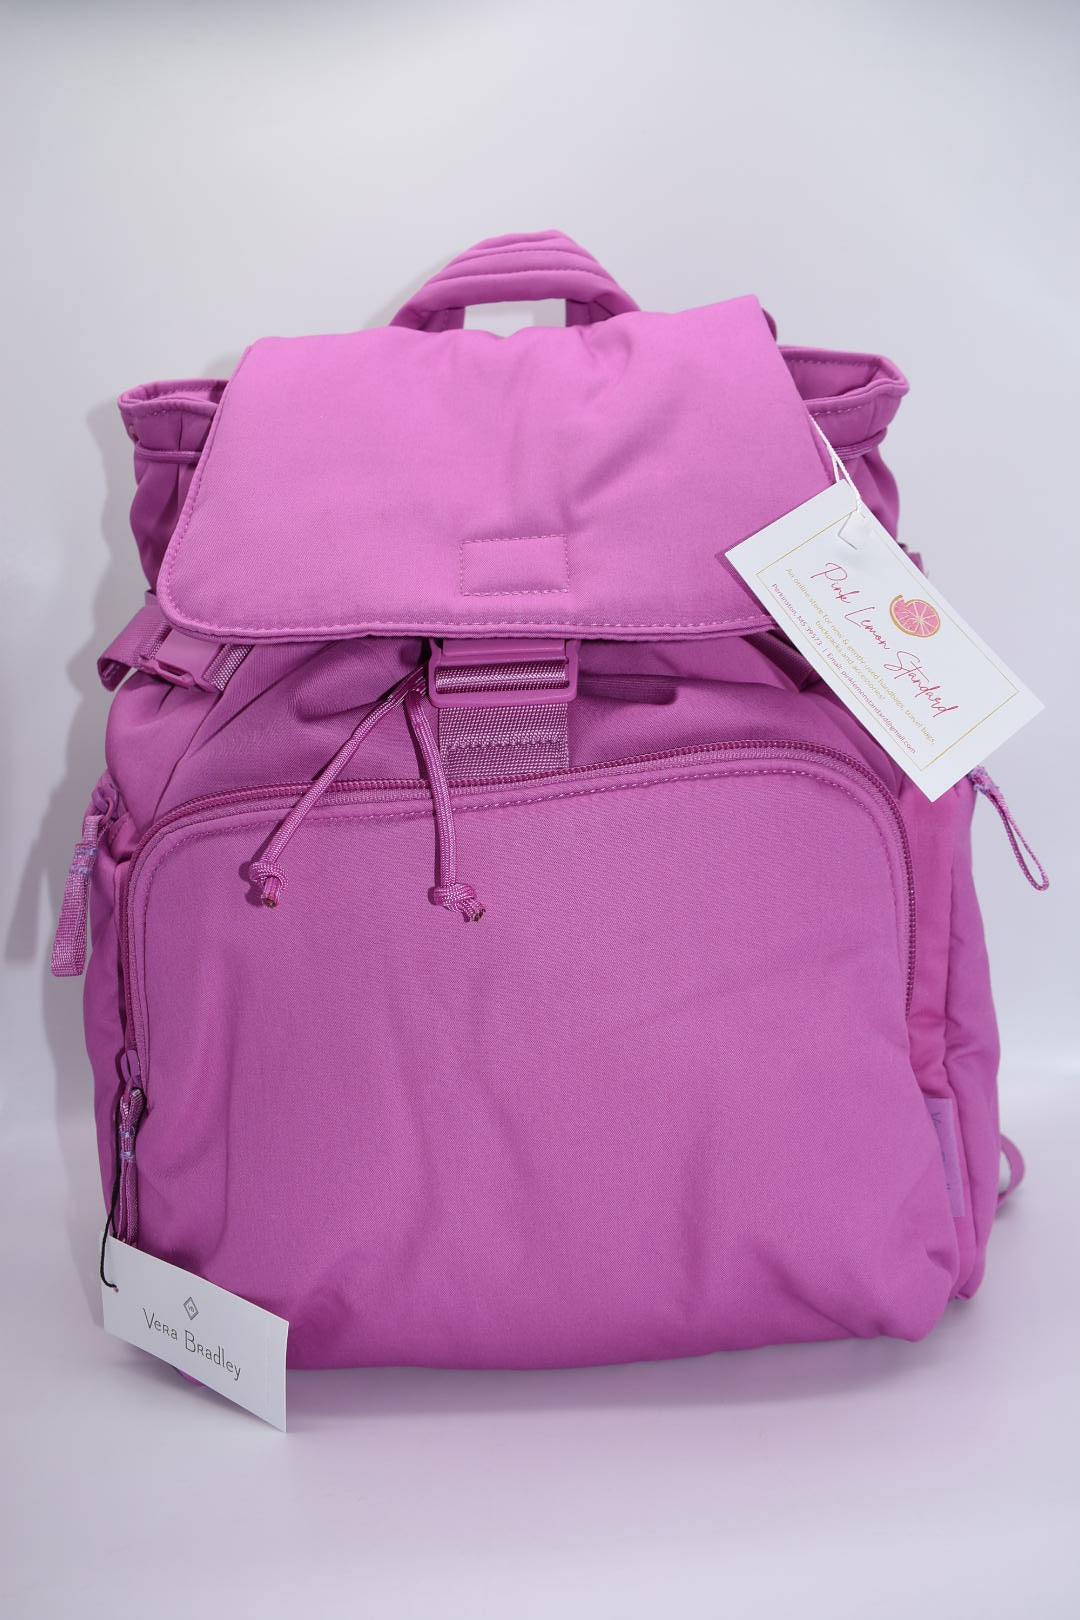 Vera Bradley Utility Backpack in "Rich Orchid" Pattern